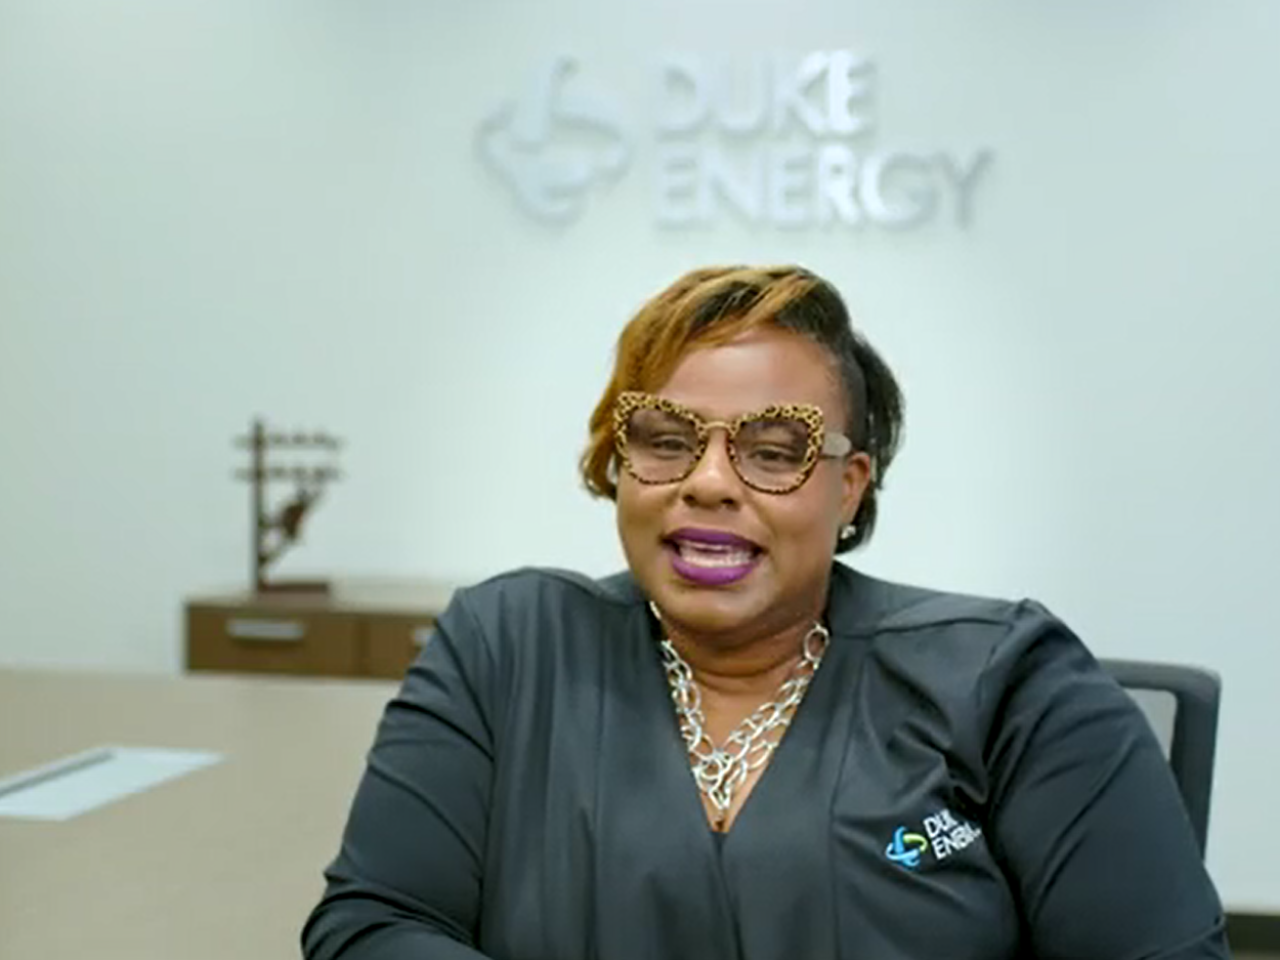 LaQuitta Gent, seated in a conference room. "Duke Energy" sign behind her.